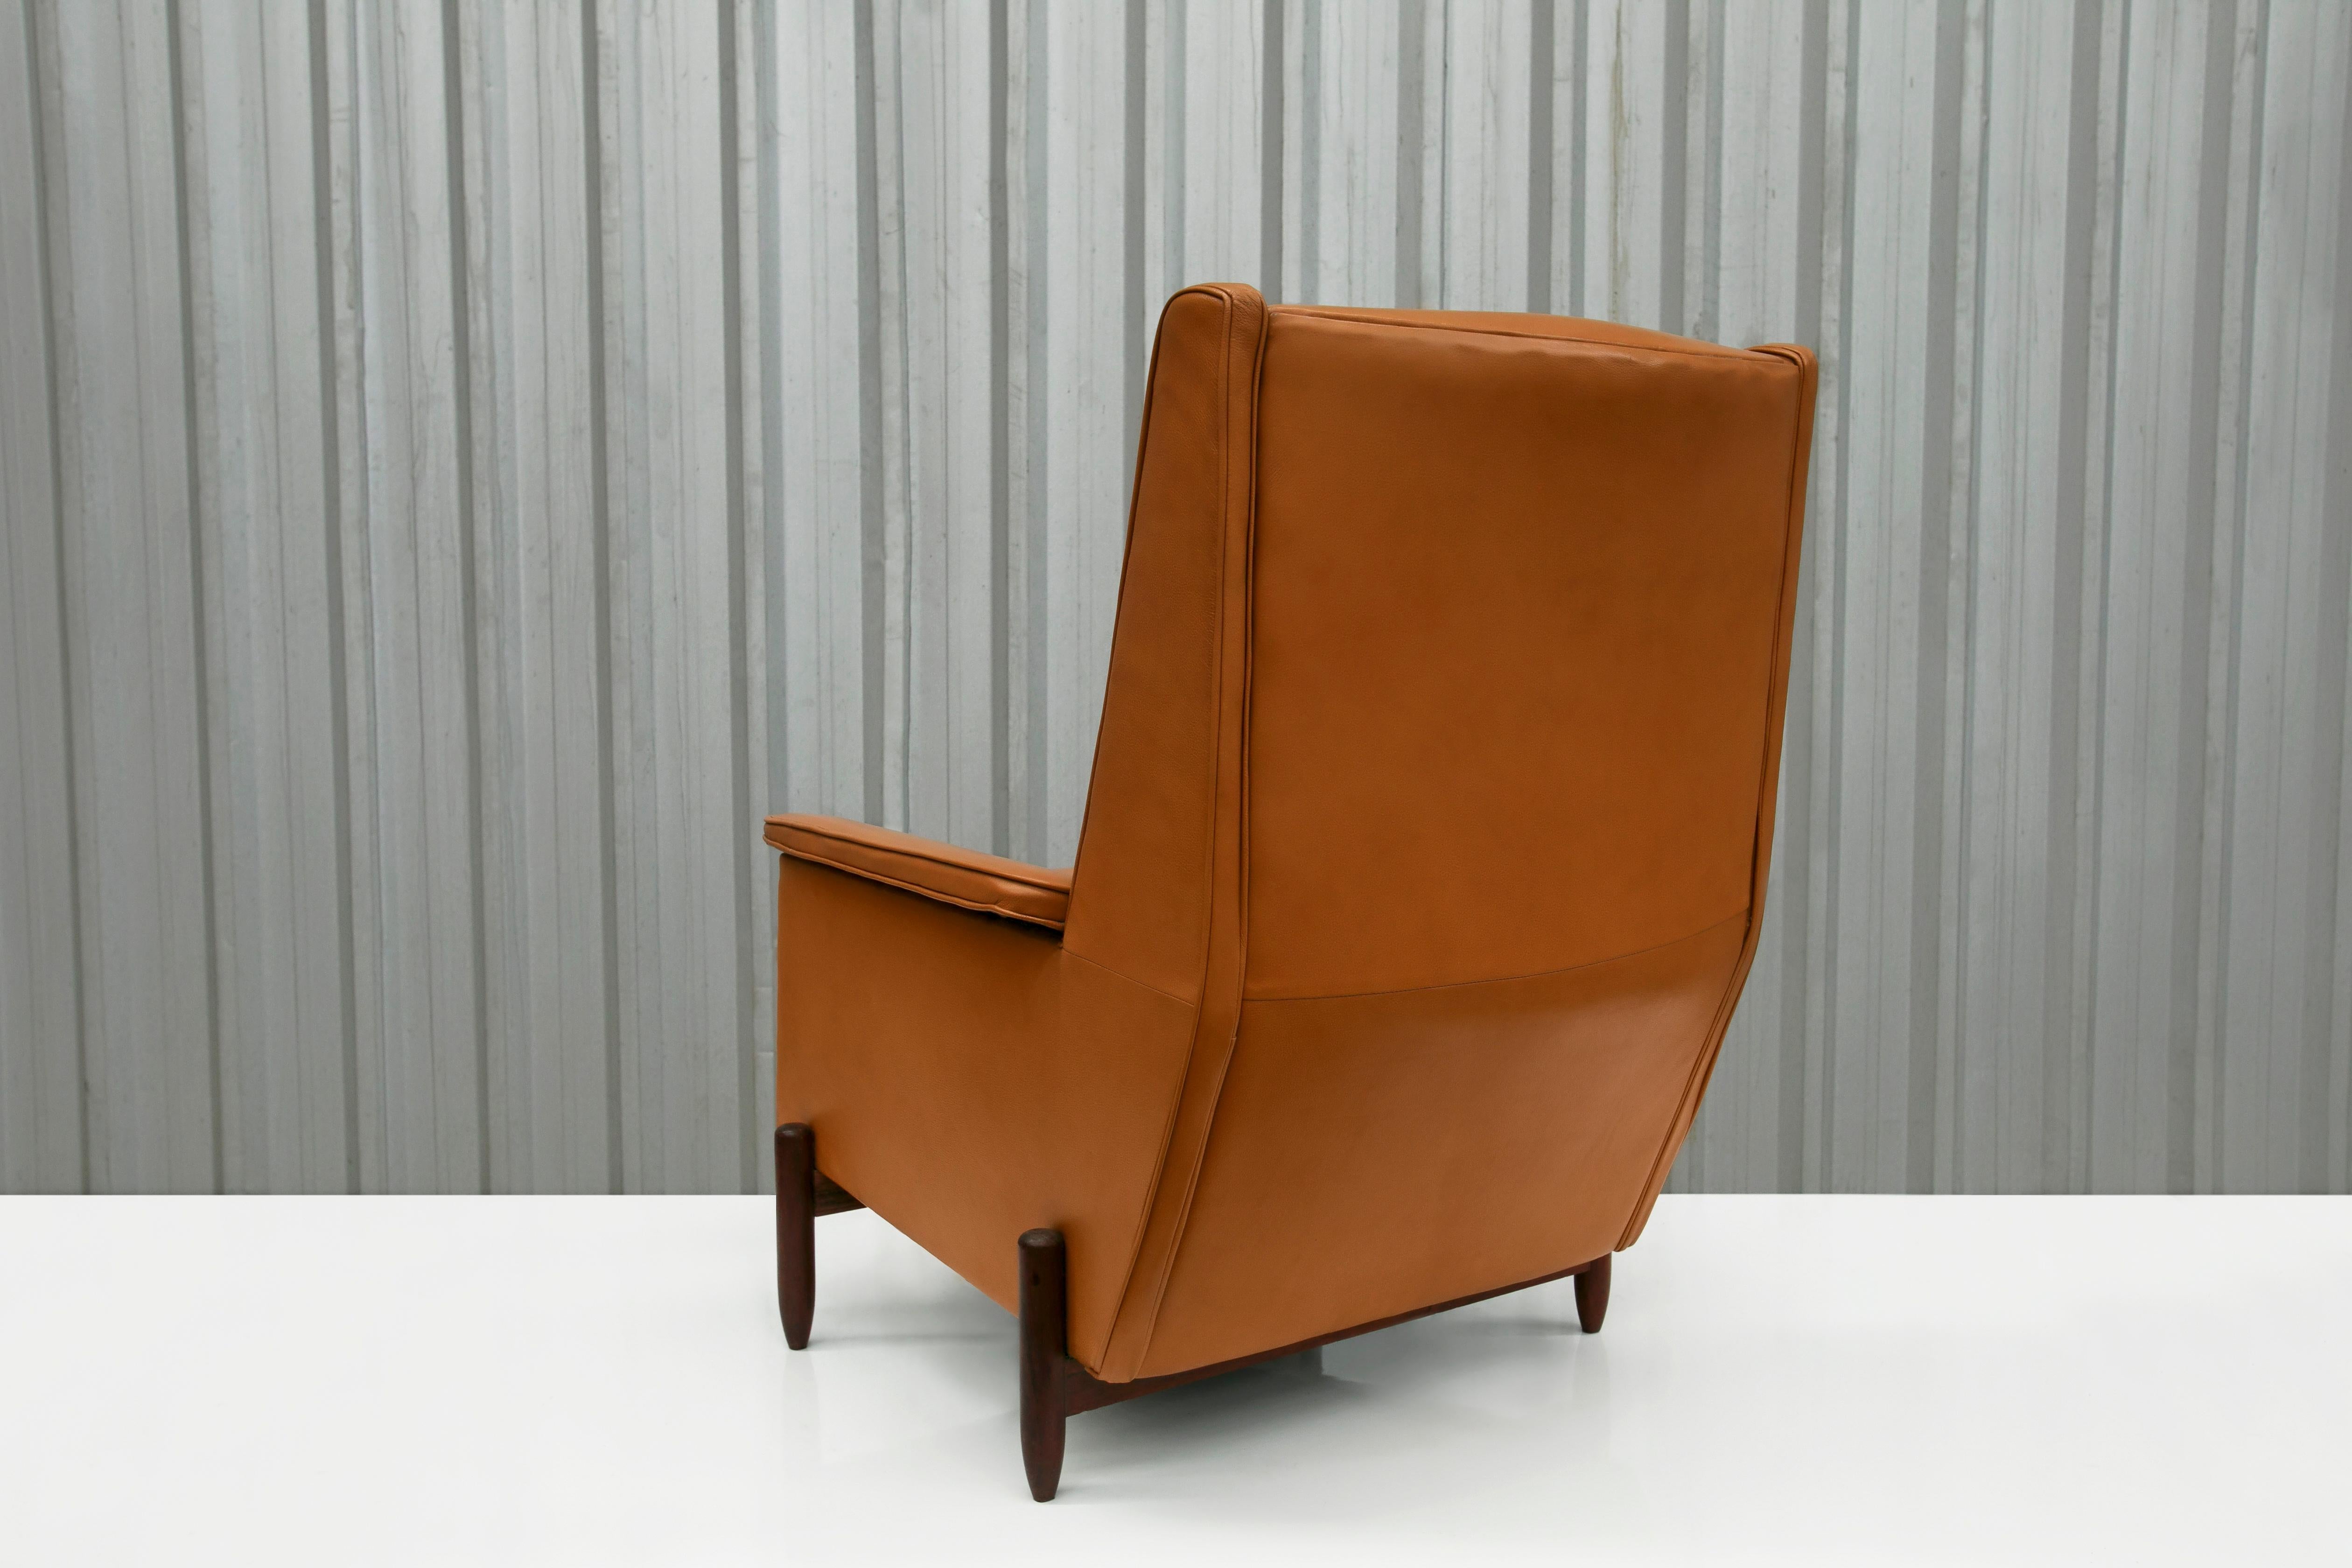 Woodwork Brazilian Modern Club Chair in Hardwood & Leather by Jorge Jabour, 1960’s For Sale